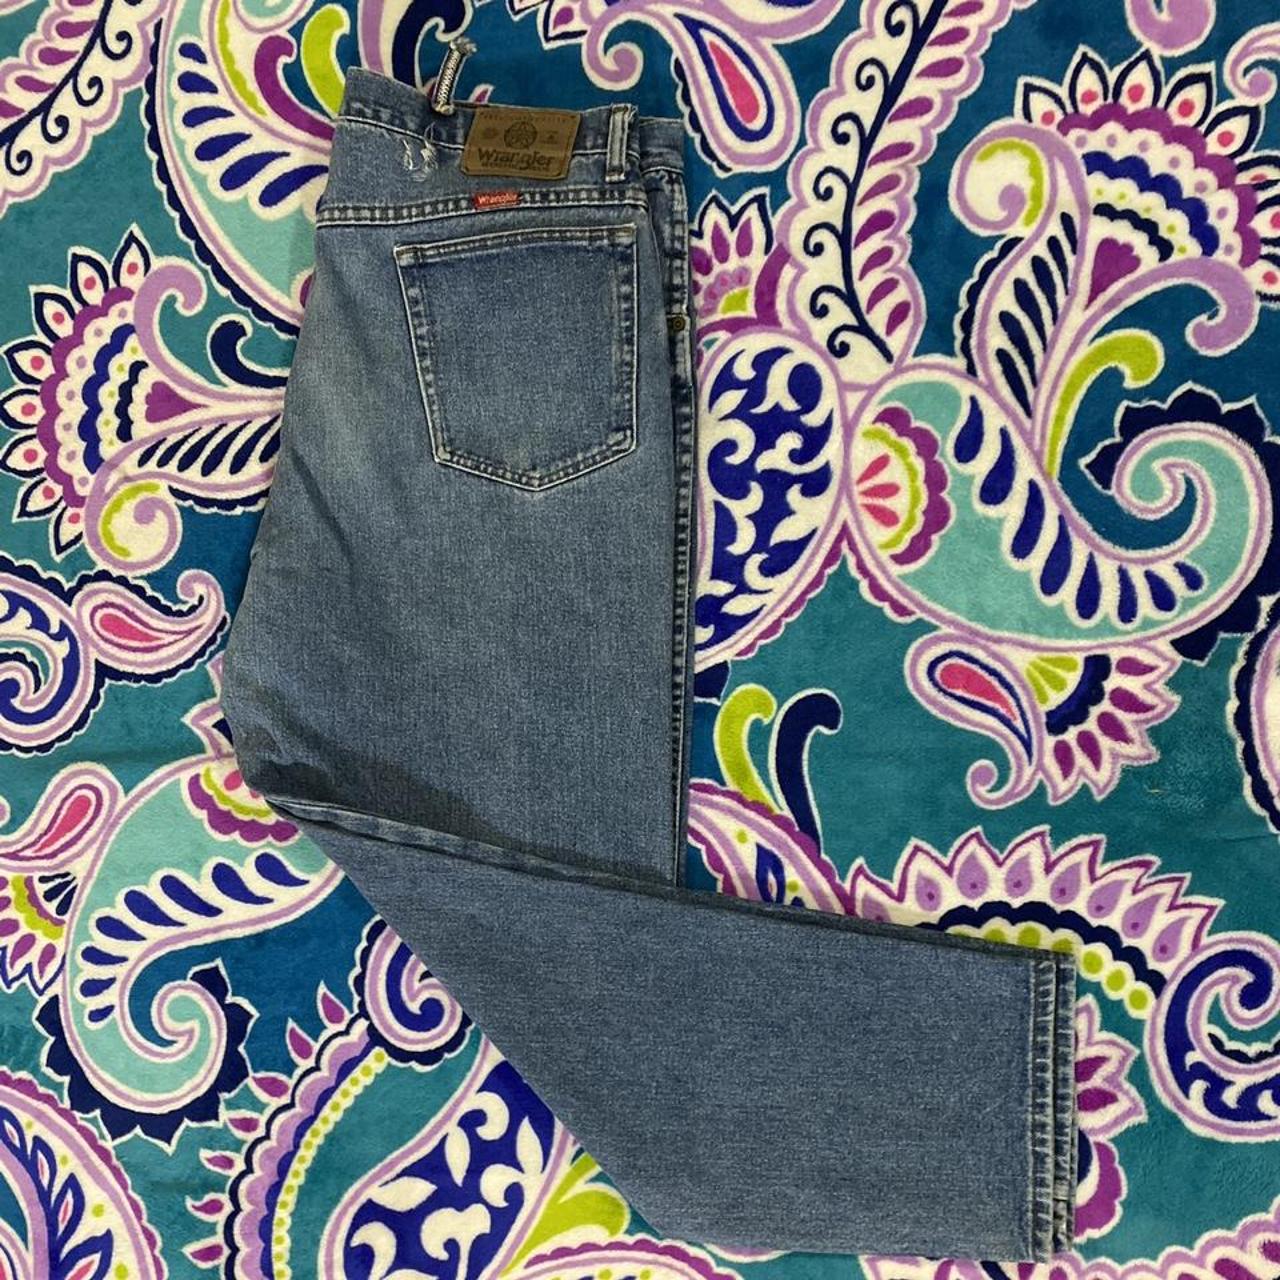 Product Image 1 - Vintage 90s Wrangler jeans! These